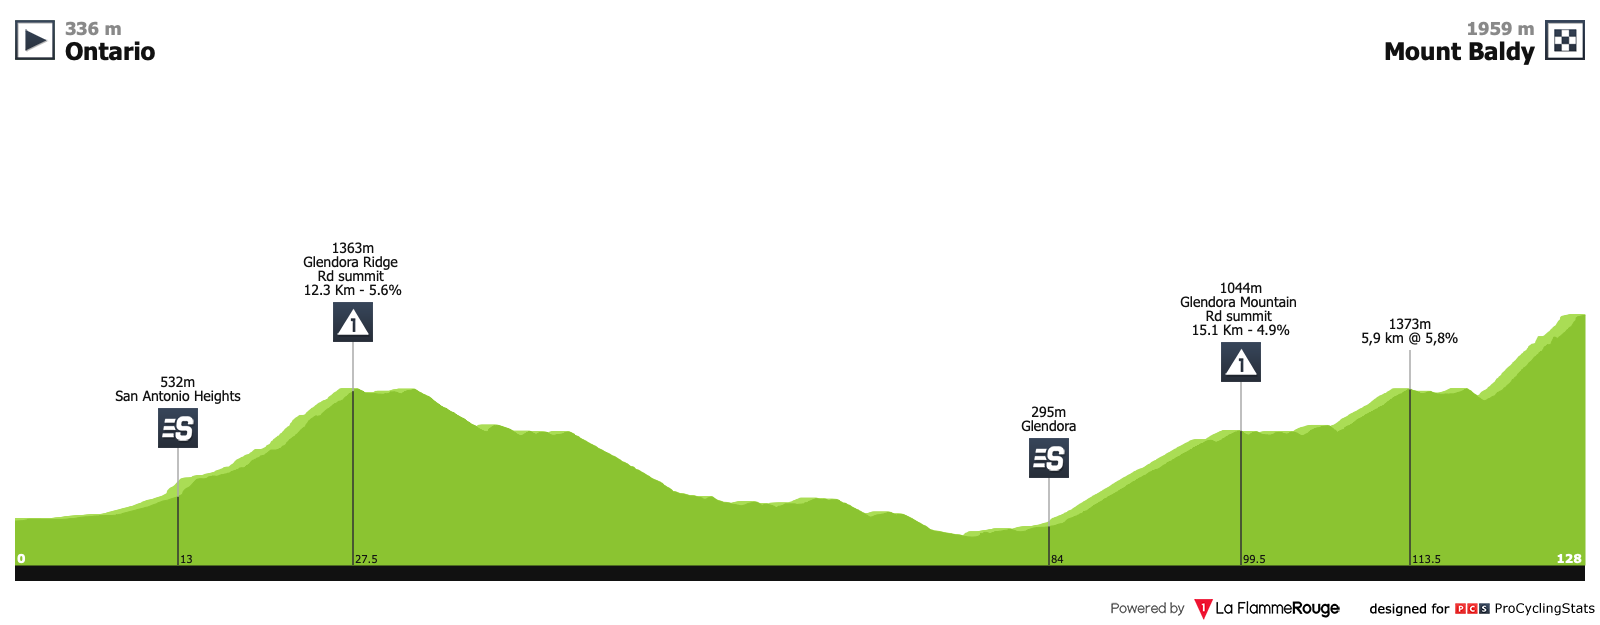 tour-of-california-2019-stage-6-profile-n2-8d35c0c1e5.png